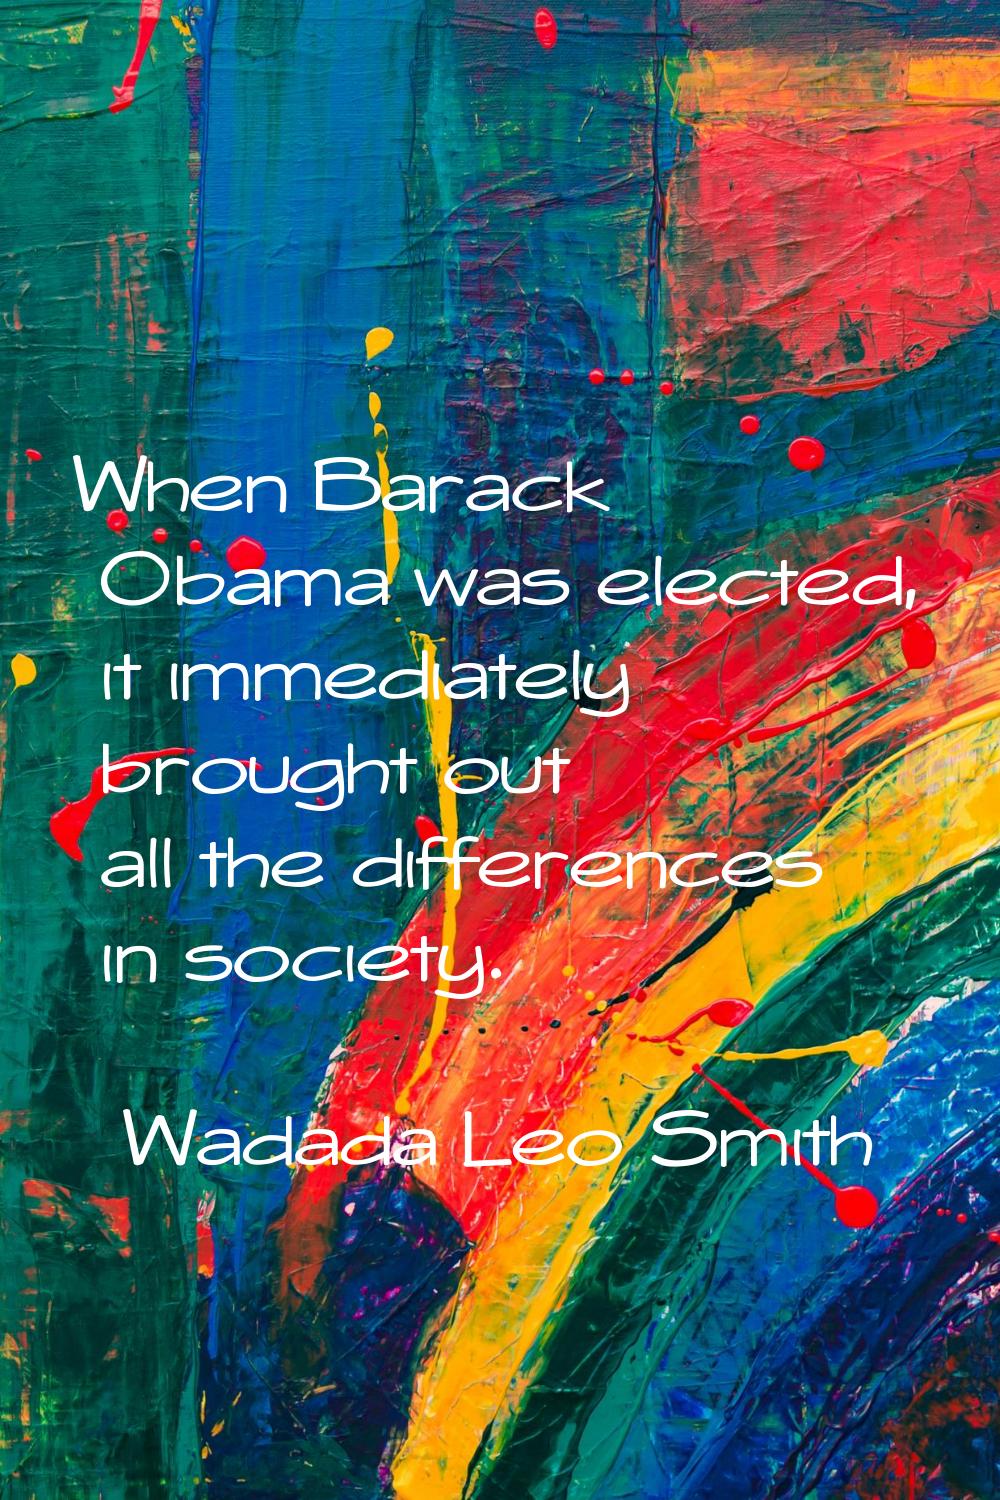 When Barack Obama was elected, it immediately brought out all the differences in society.